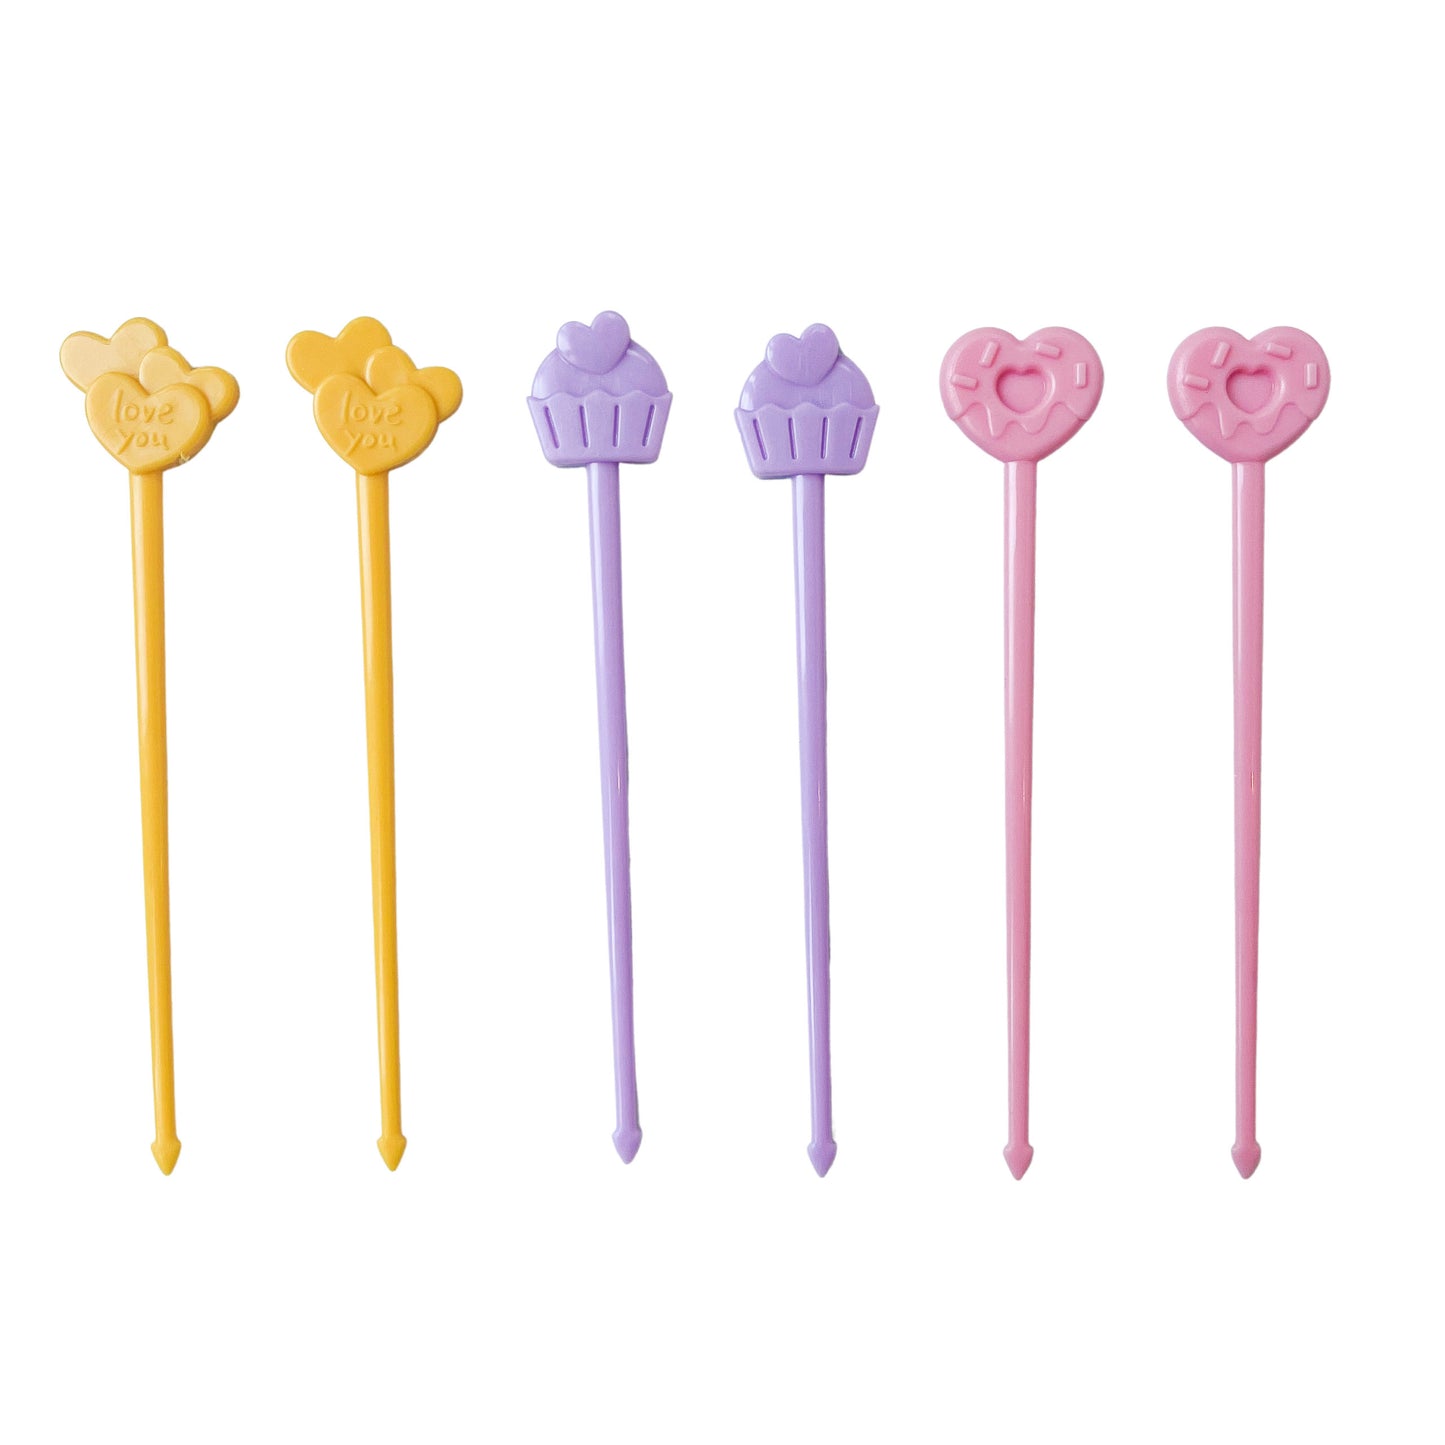 6 food skewers for kids in yellow, purple and pink..